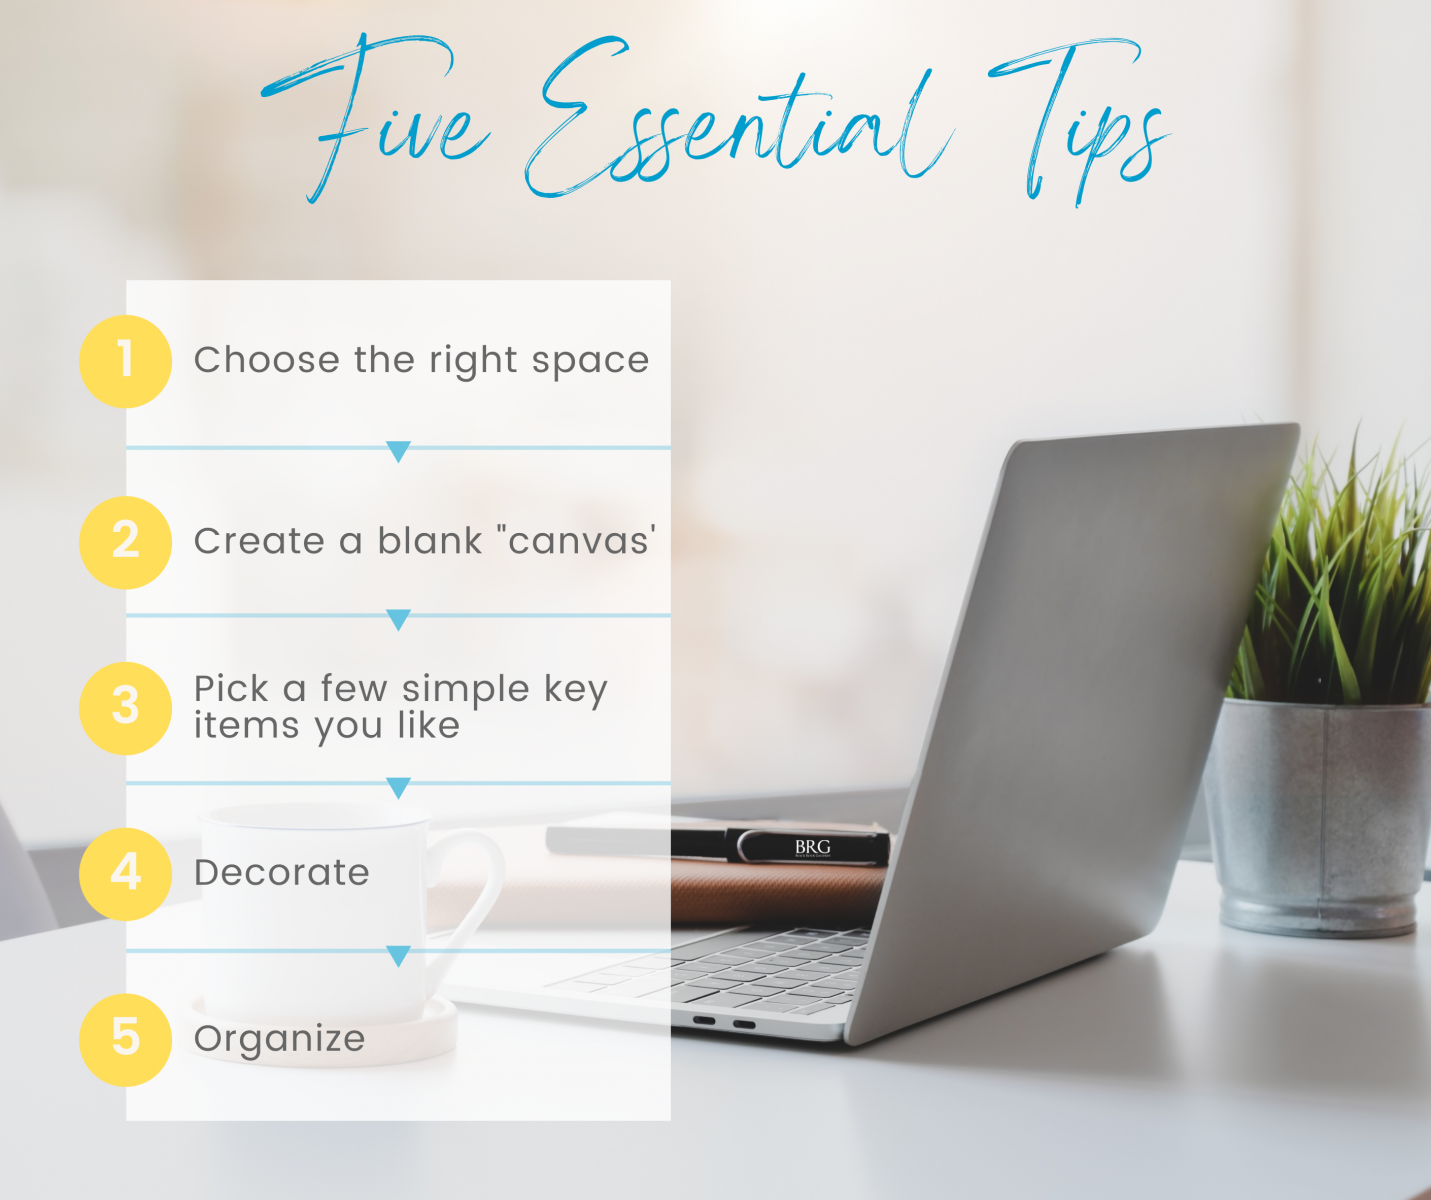 Follow these five easy to manage, but essential tips to creating a home office space that lets you 